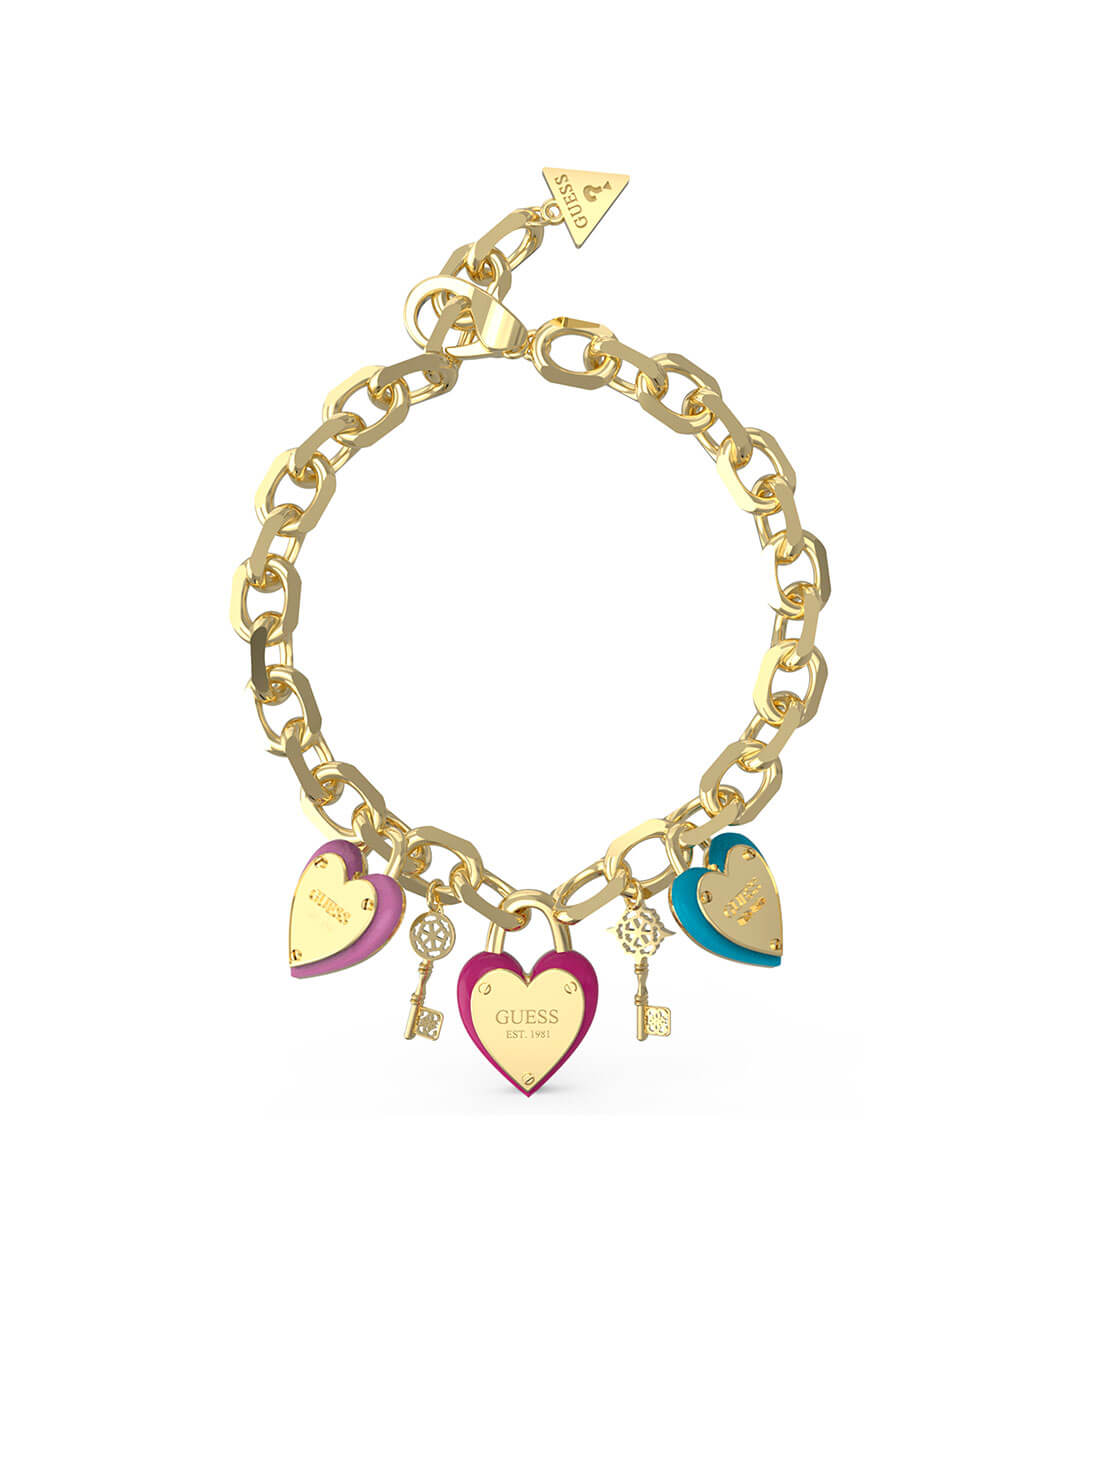 Gold All You Need Is Love Heart Charm Bracelet | GUESS Women's Jewellery | front view